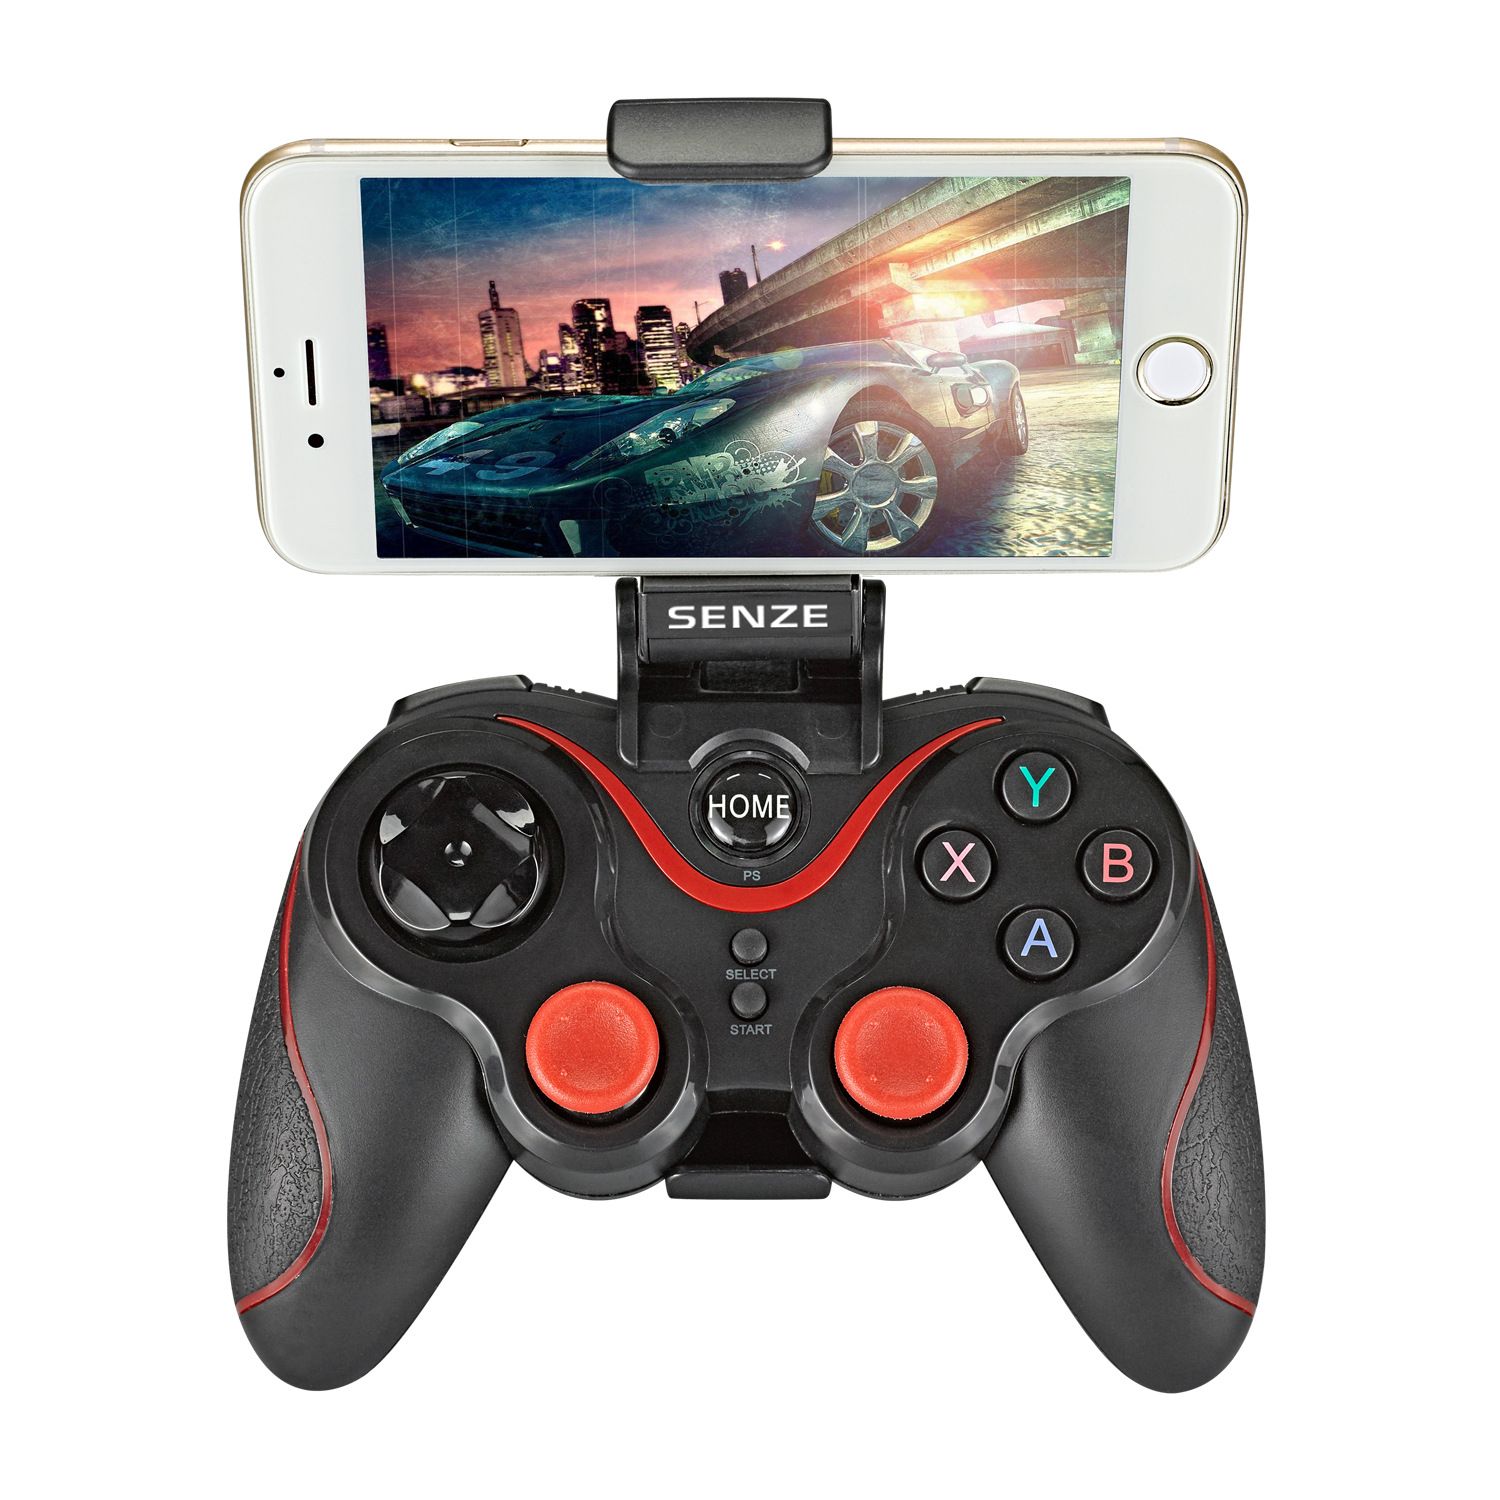 Senze-SZ-A1006-bluetooth-Gamepad-Game-Controller-for-iOS-Android-Mobile-Phone-Tablet-TV-Box-Smart-TV-1623866